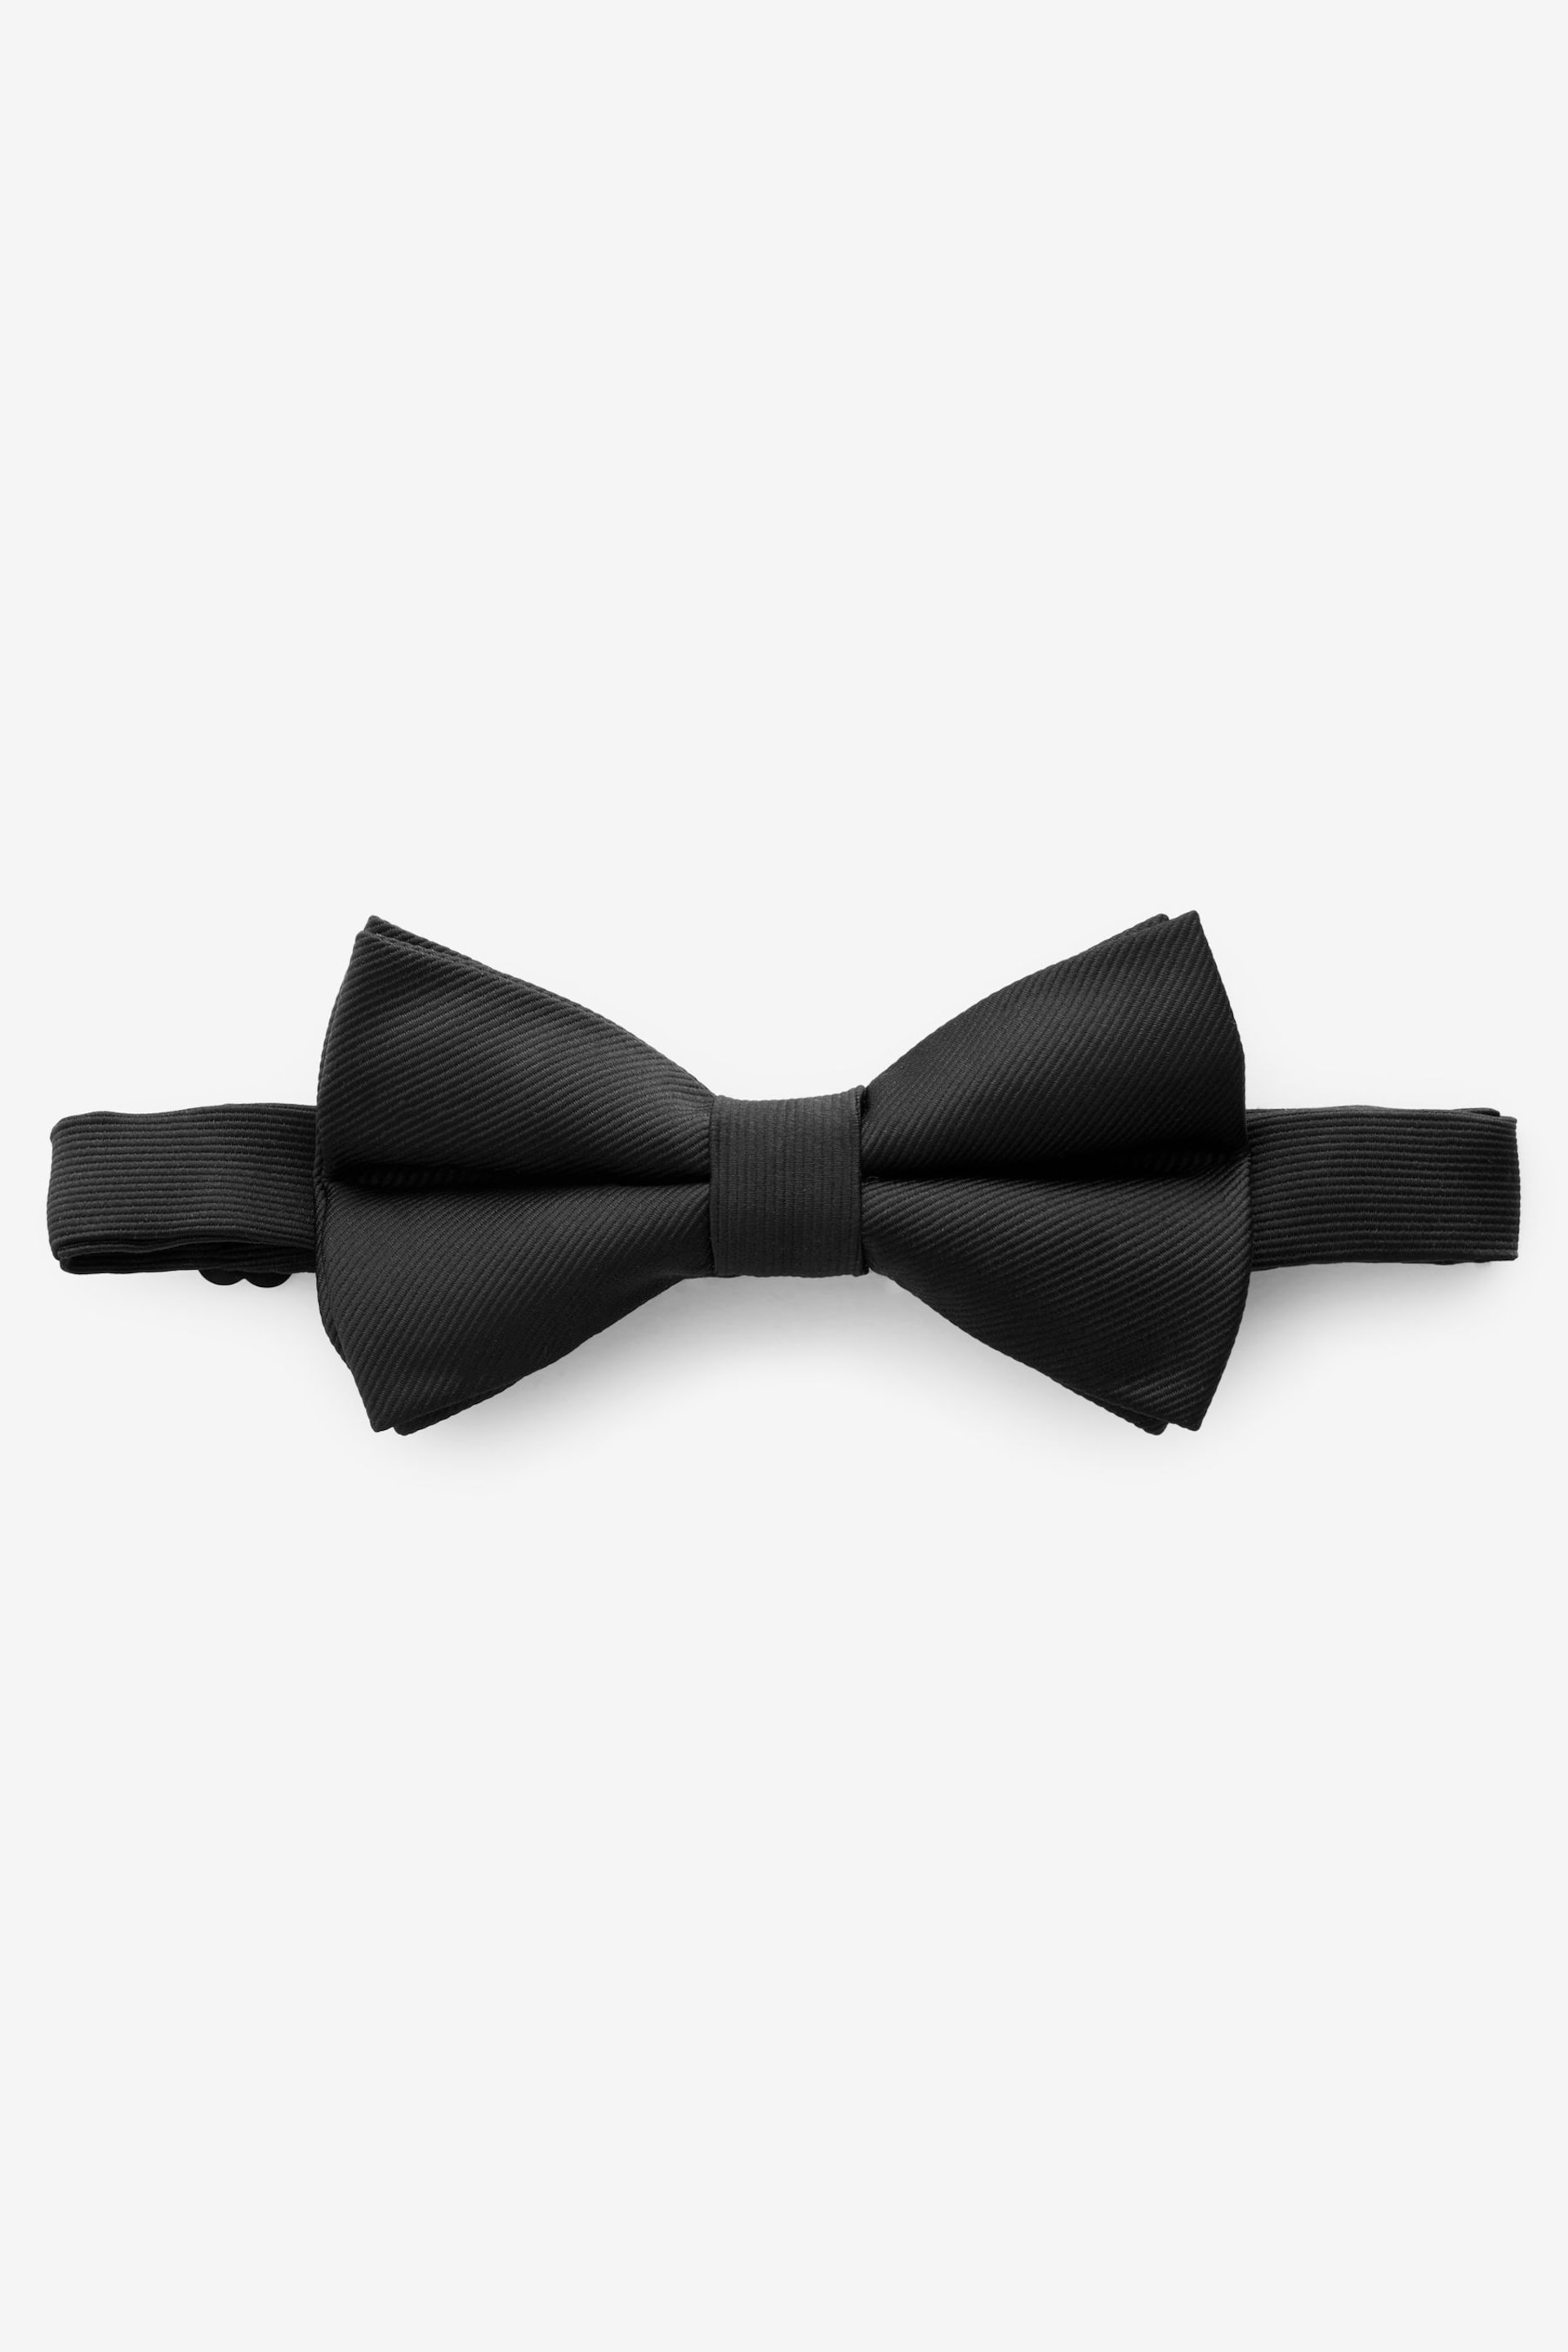 Black Recycled Polyester Twill Bow Tie - Image 1 of 5